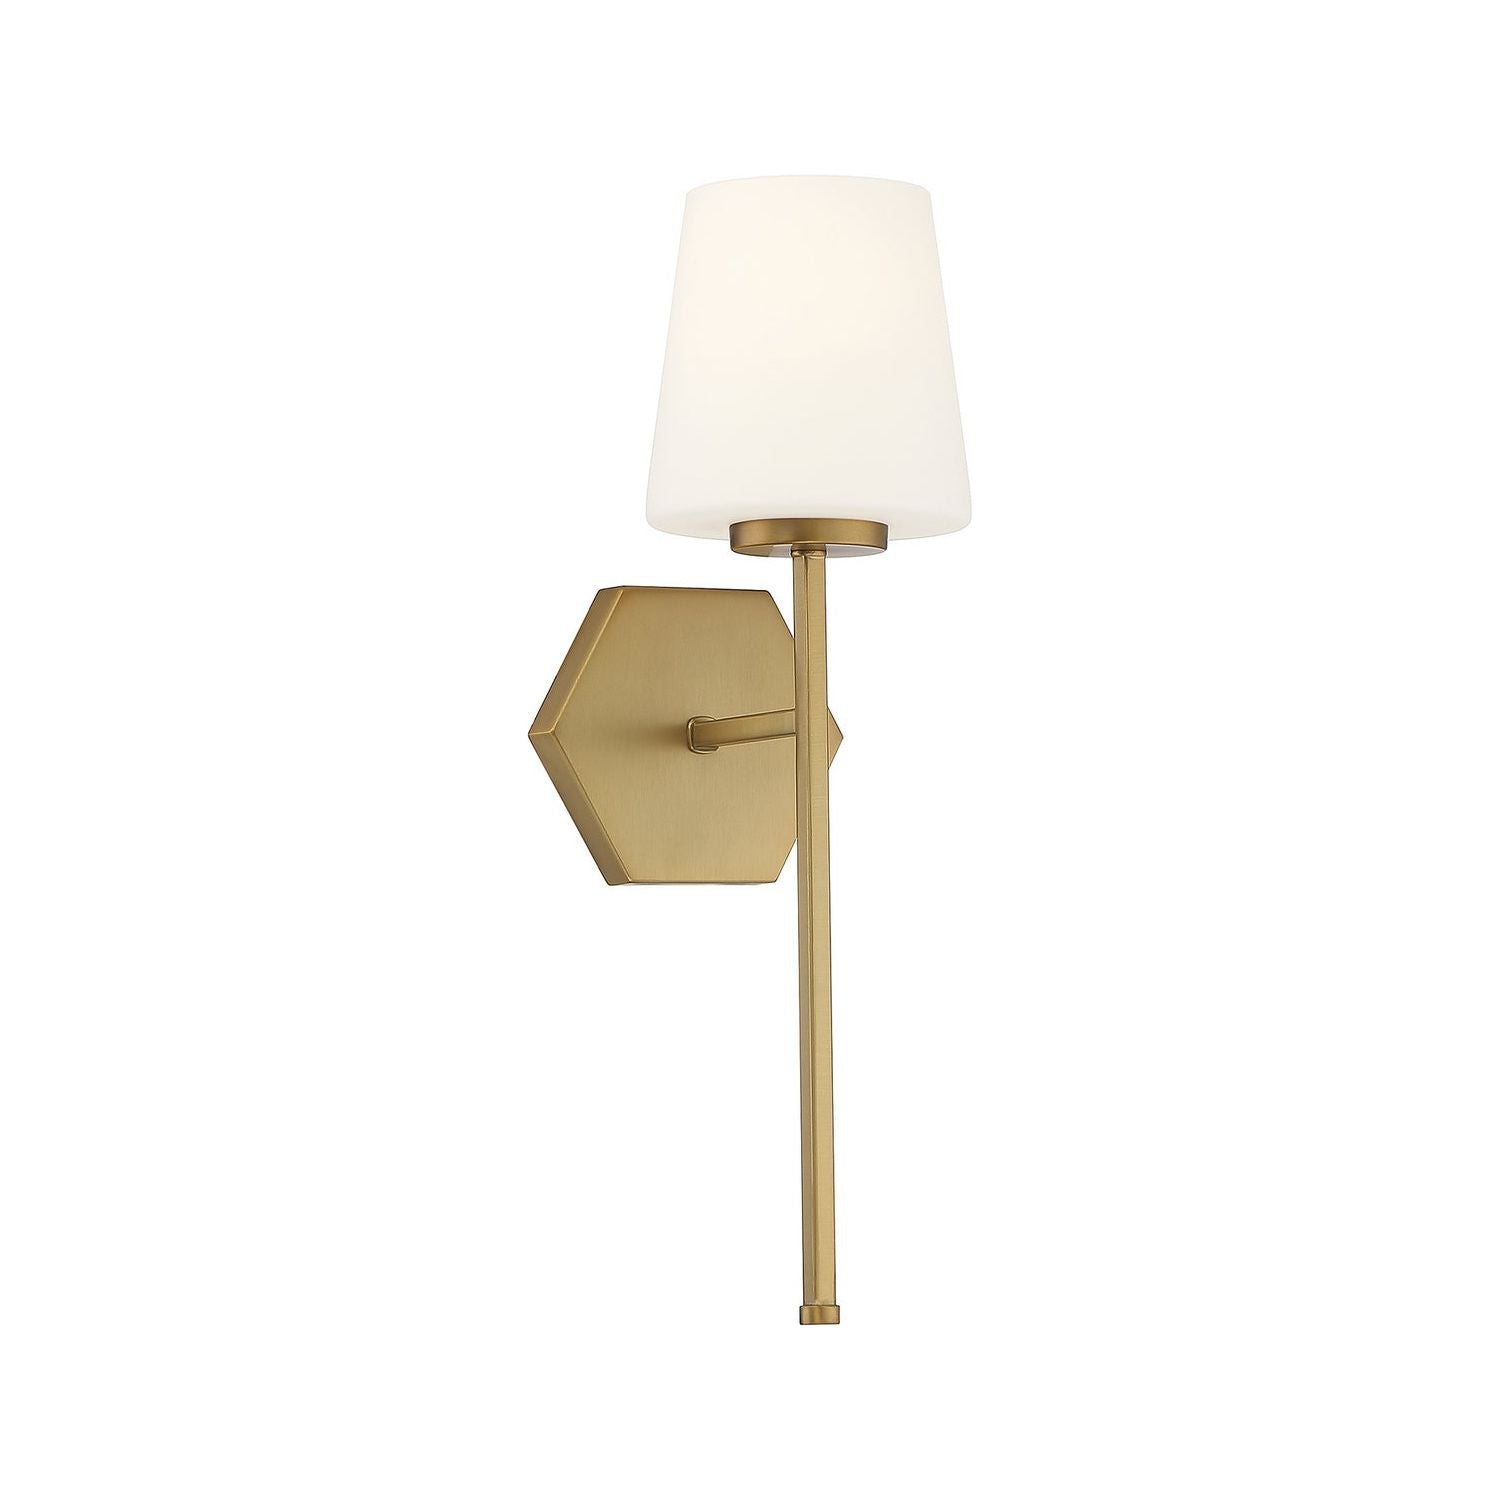 Lighting One E - V6-L9-2222-1-322 - One Light Wall Sconce - Conover - Warm Brass